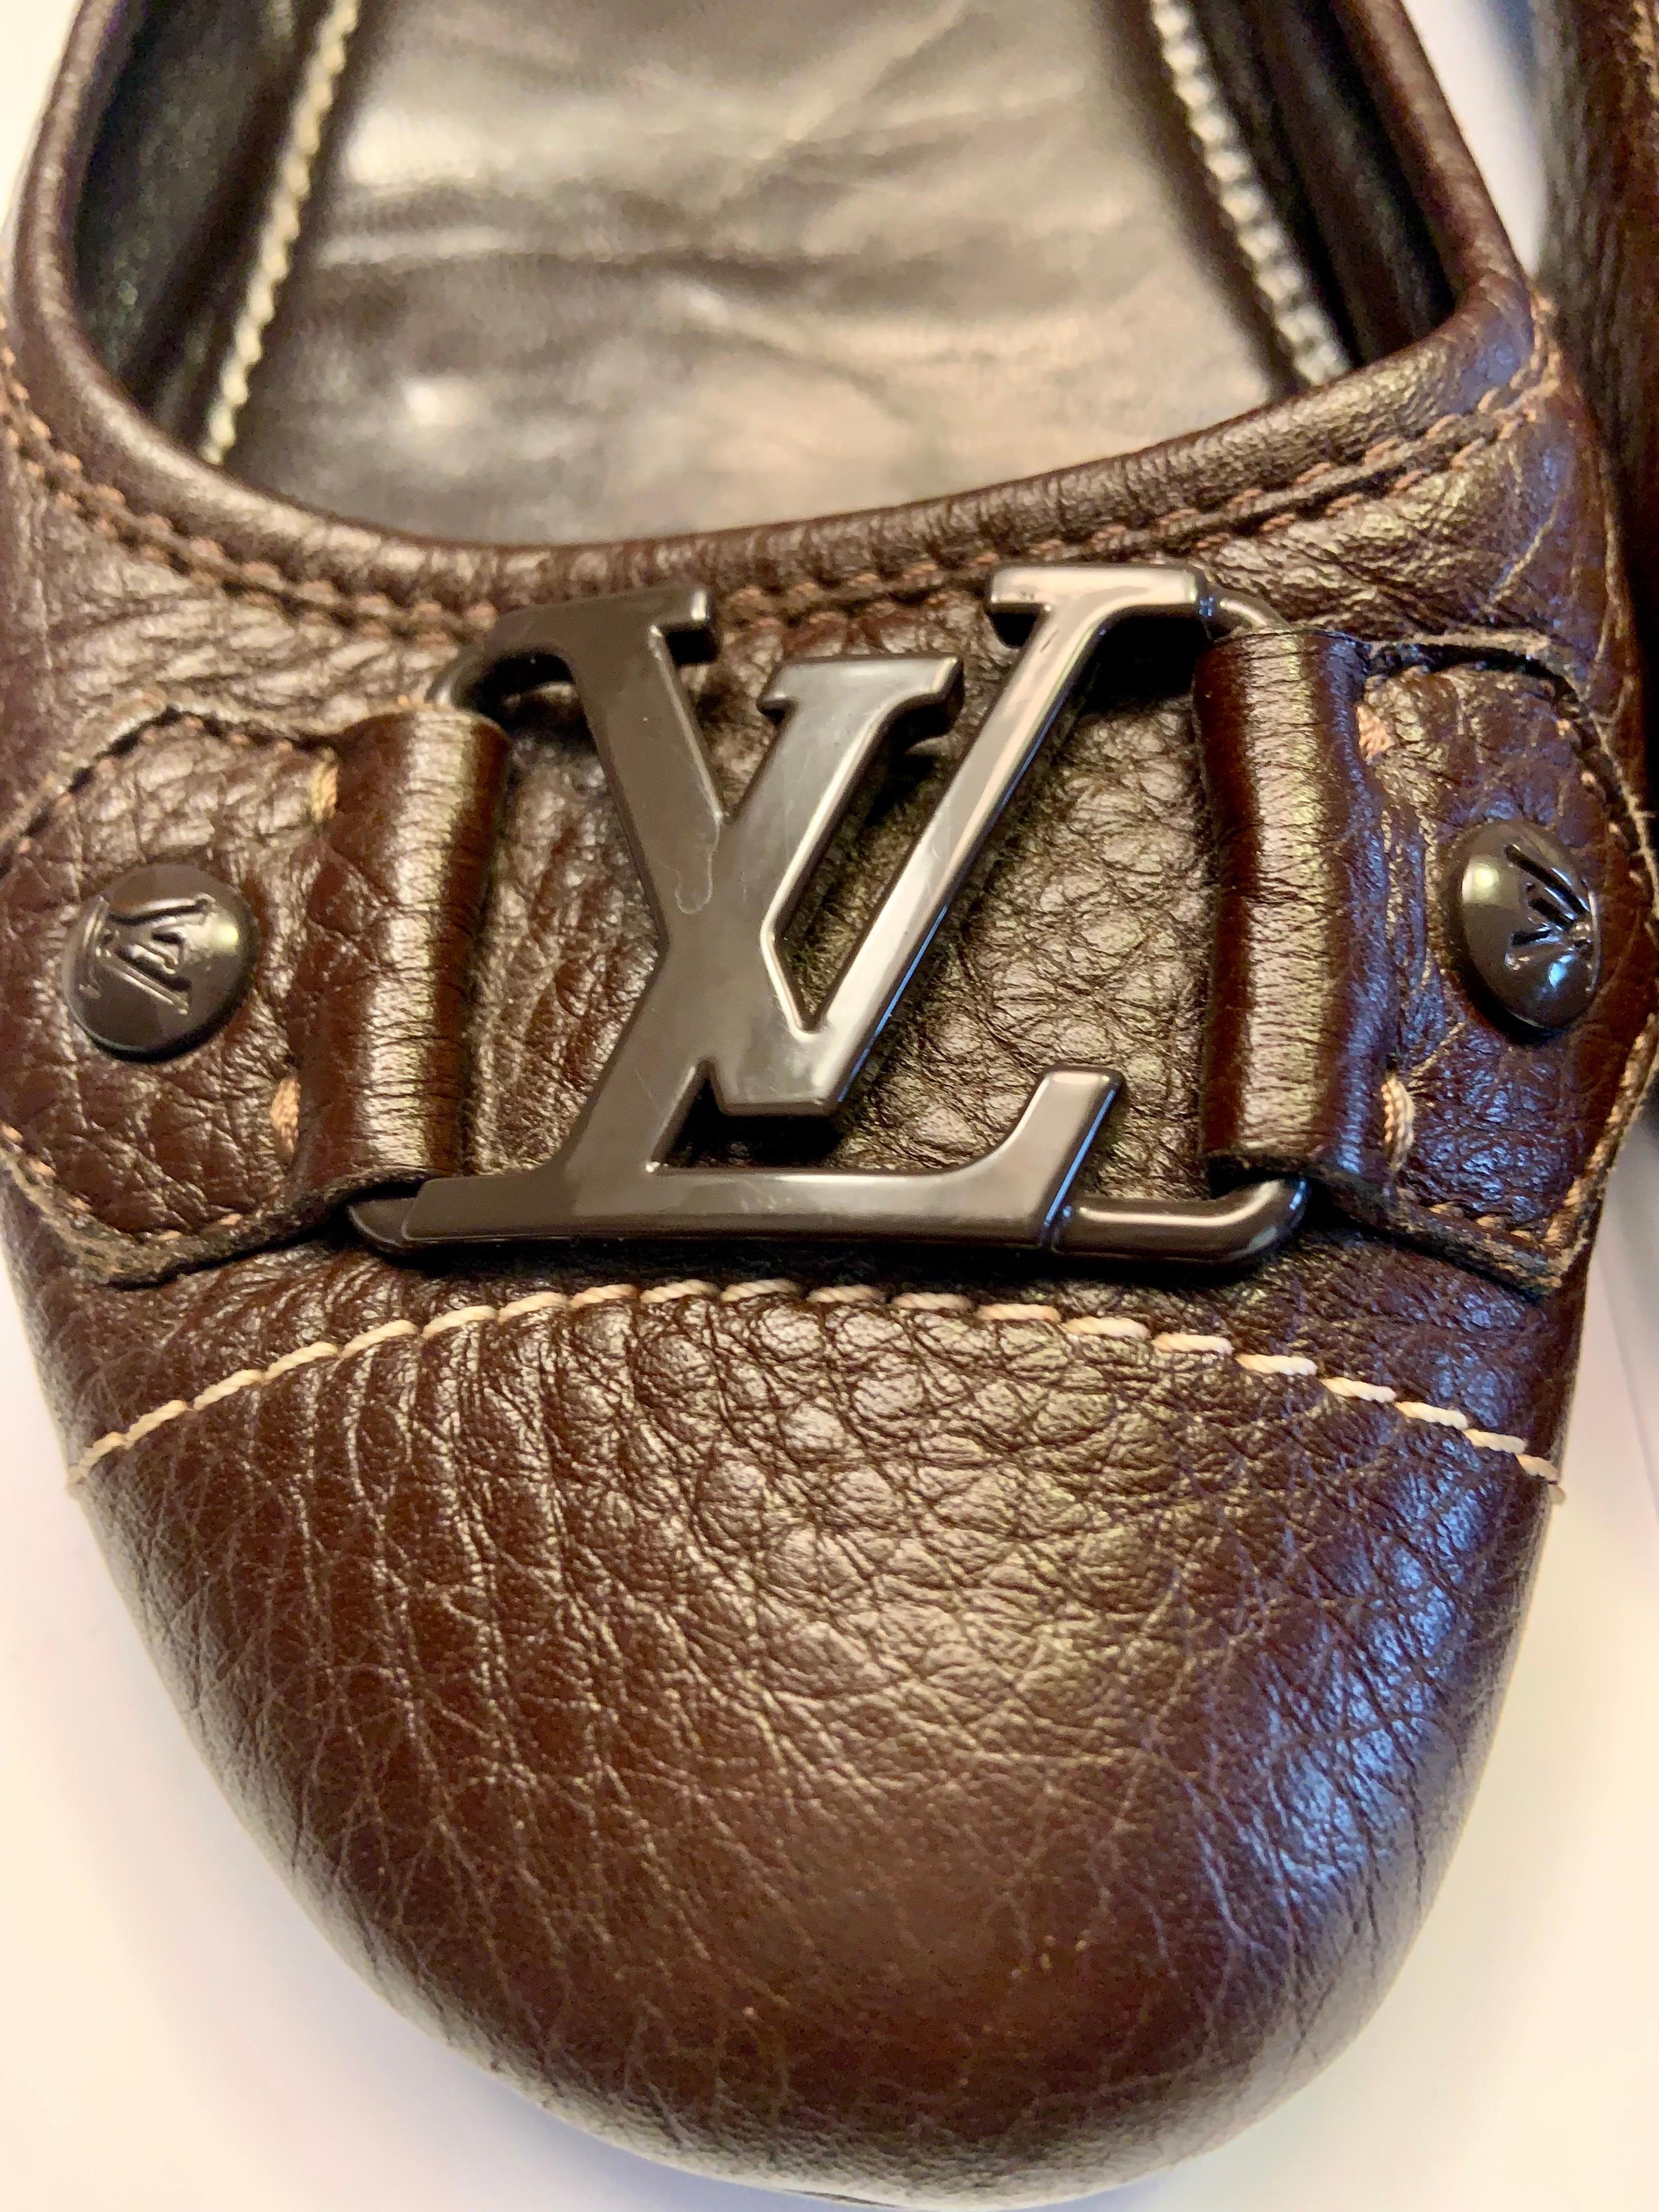 These Louis Vuitton brown leather flats have the LV logo in dark brown on the toe cap.  The dark brown leather is accented with white stitching and they are fully leather lined.  The shoes are marked a size 38 1/2 and they have very little wear. 